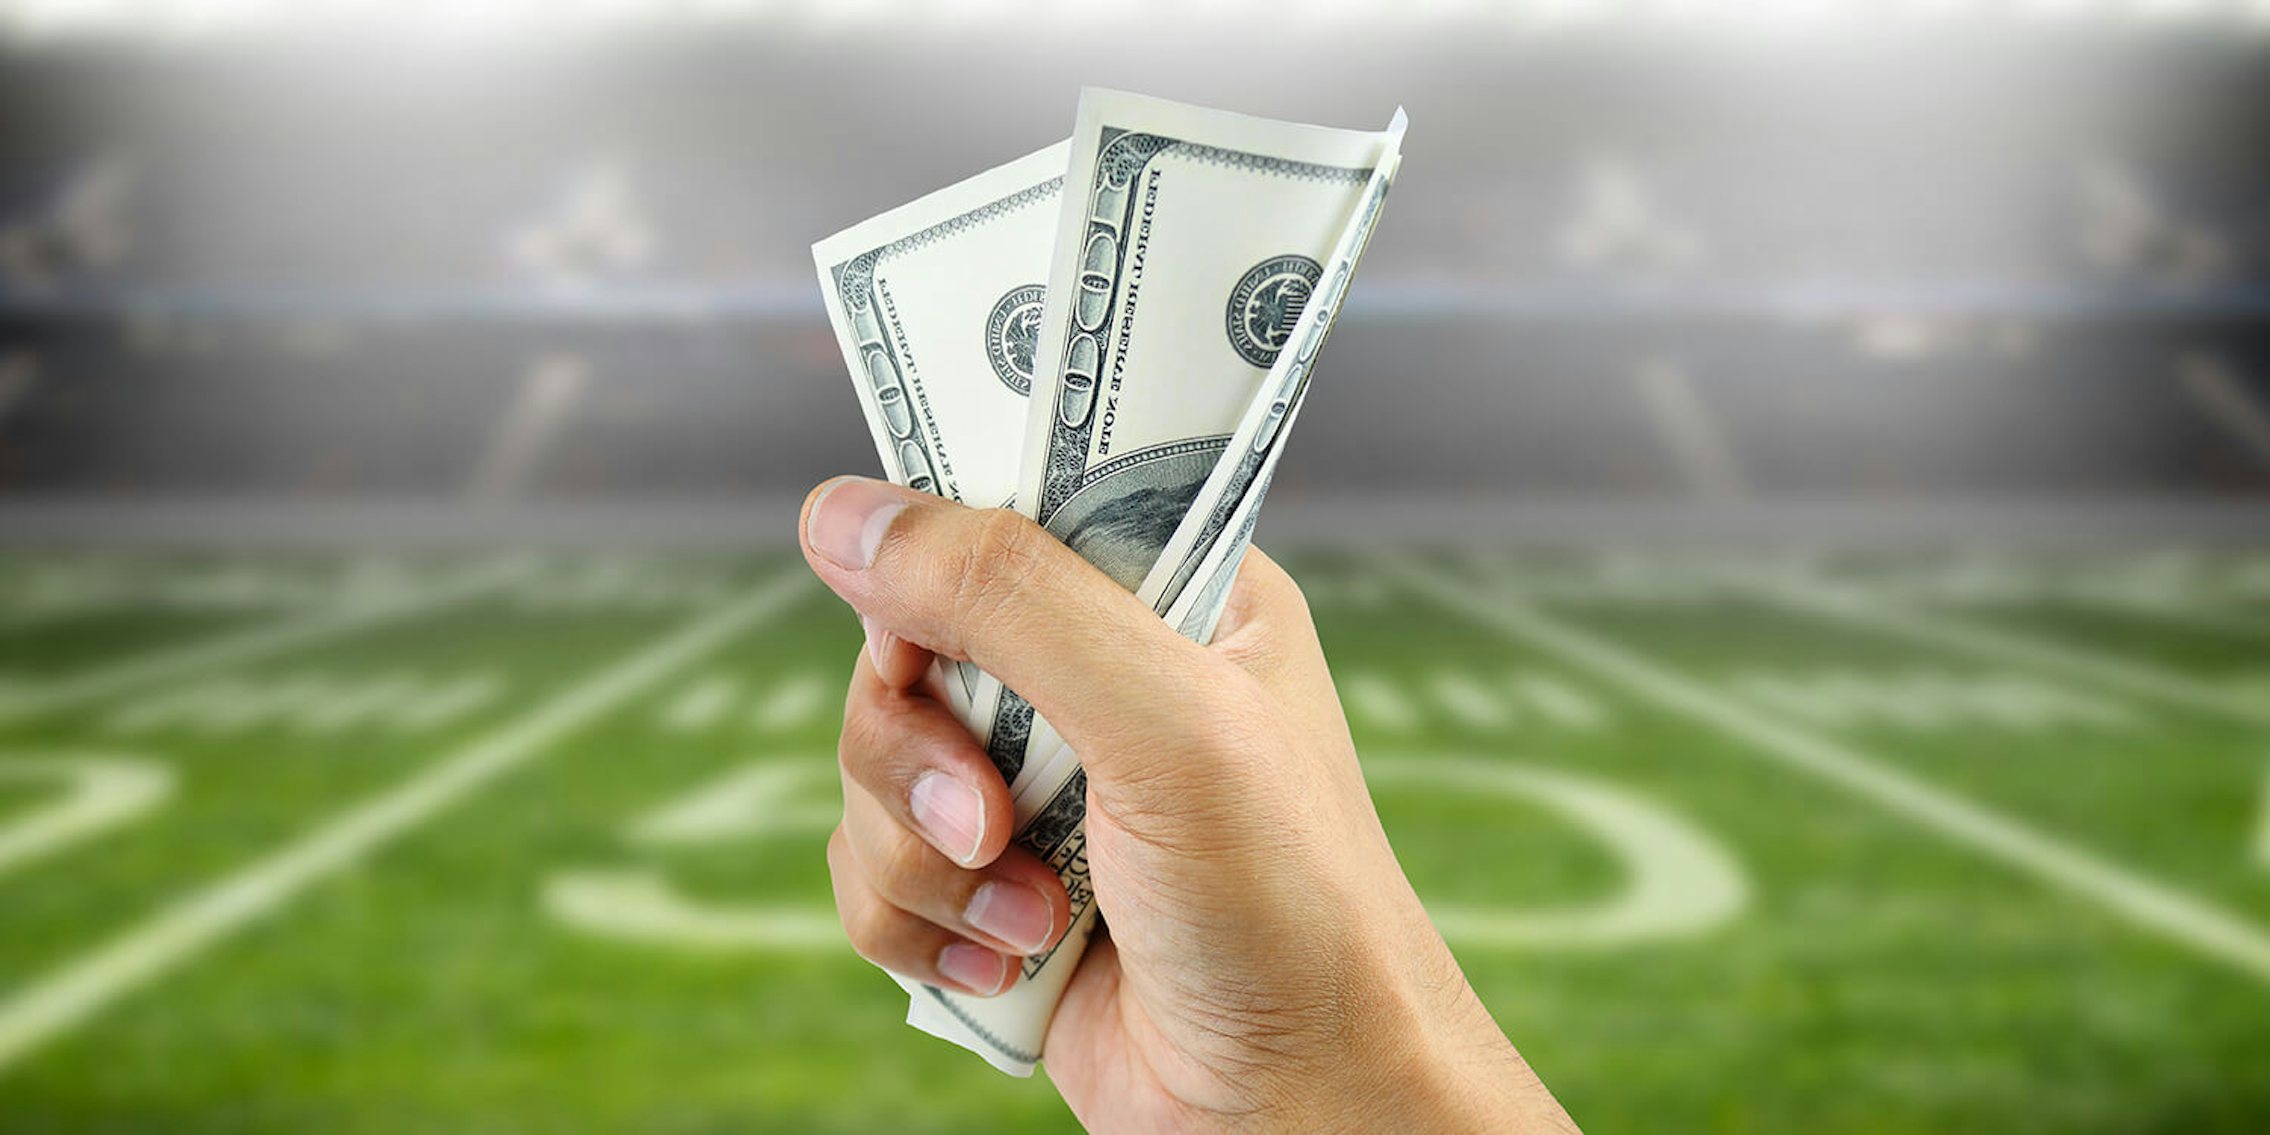 Super Bowl Prop Bets 2021: Odds and How to Bet Online in the U.S.